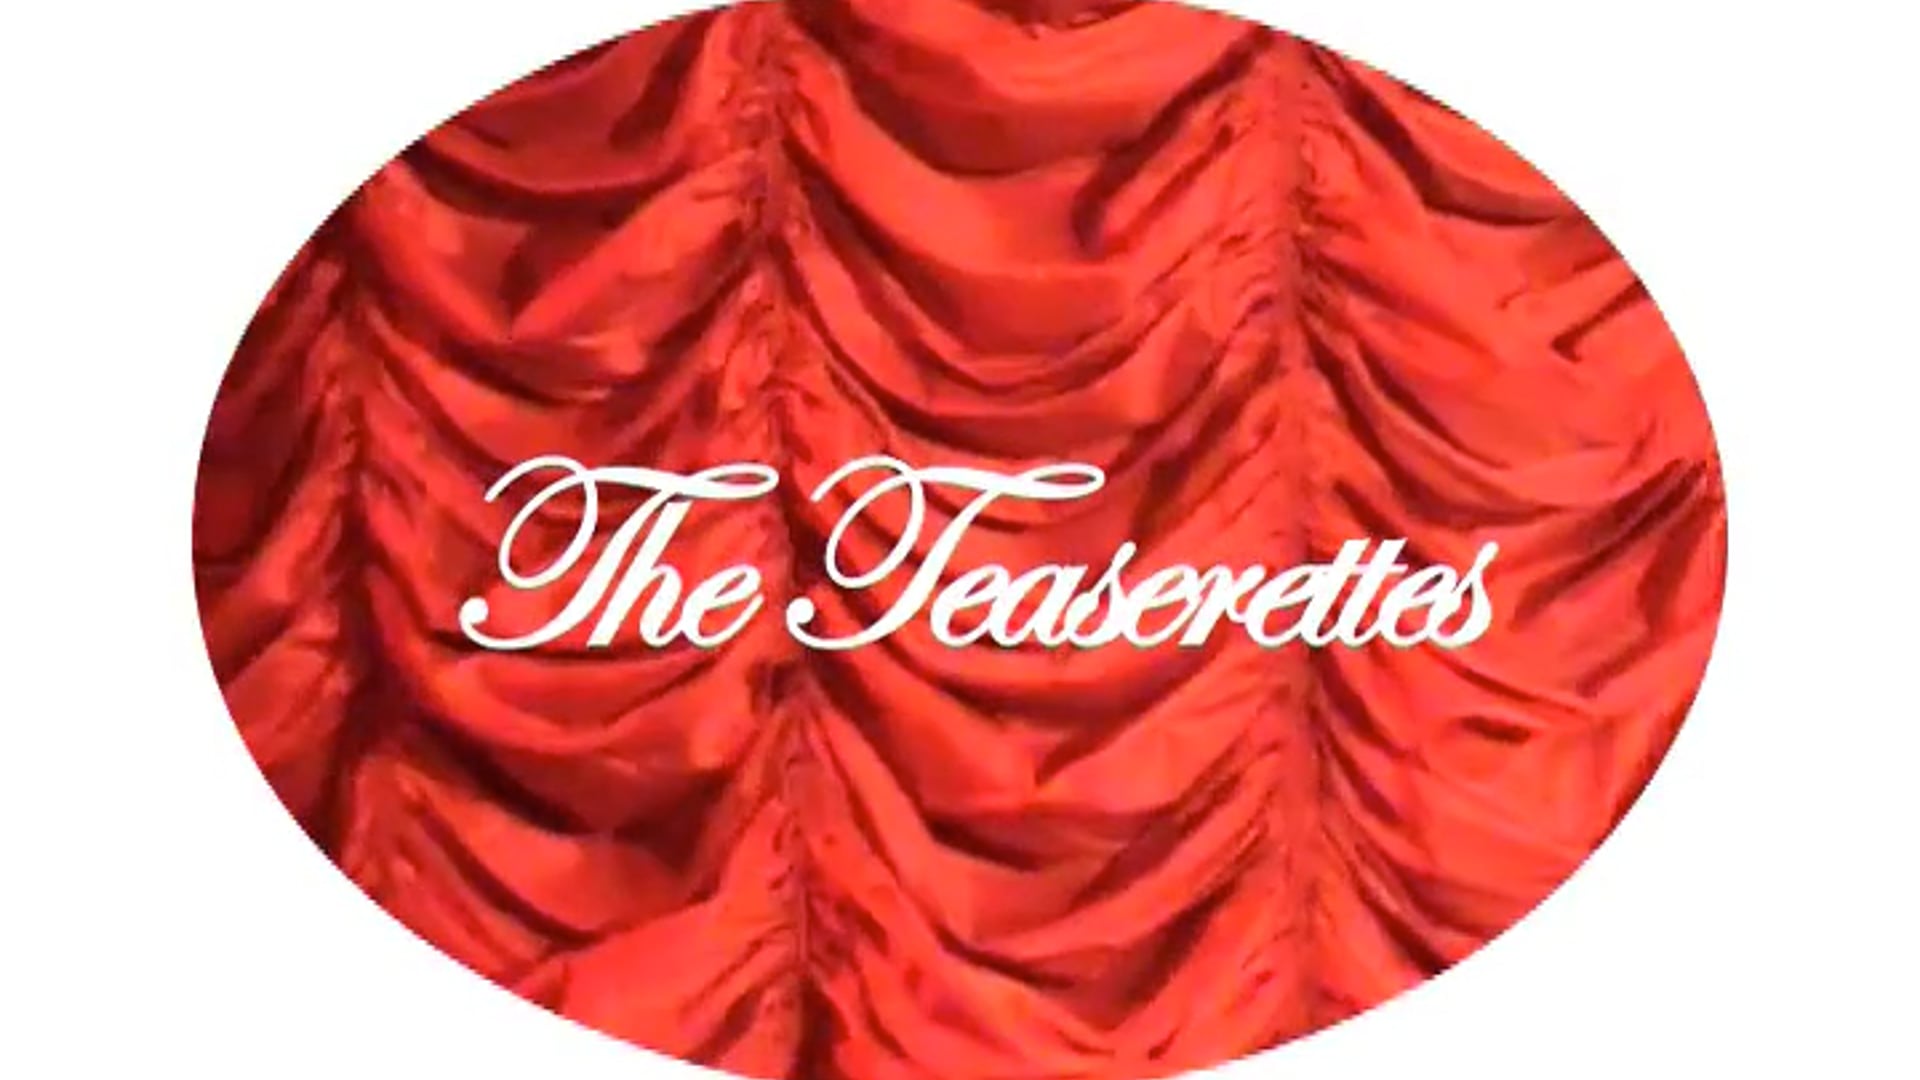 THE TEASERETTES